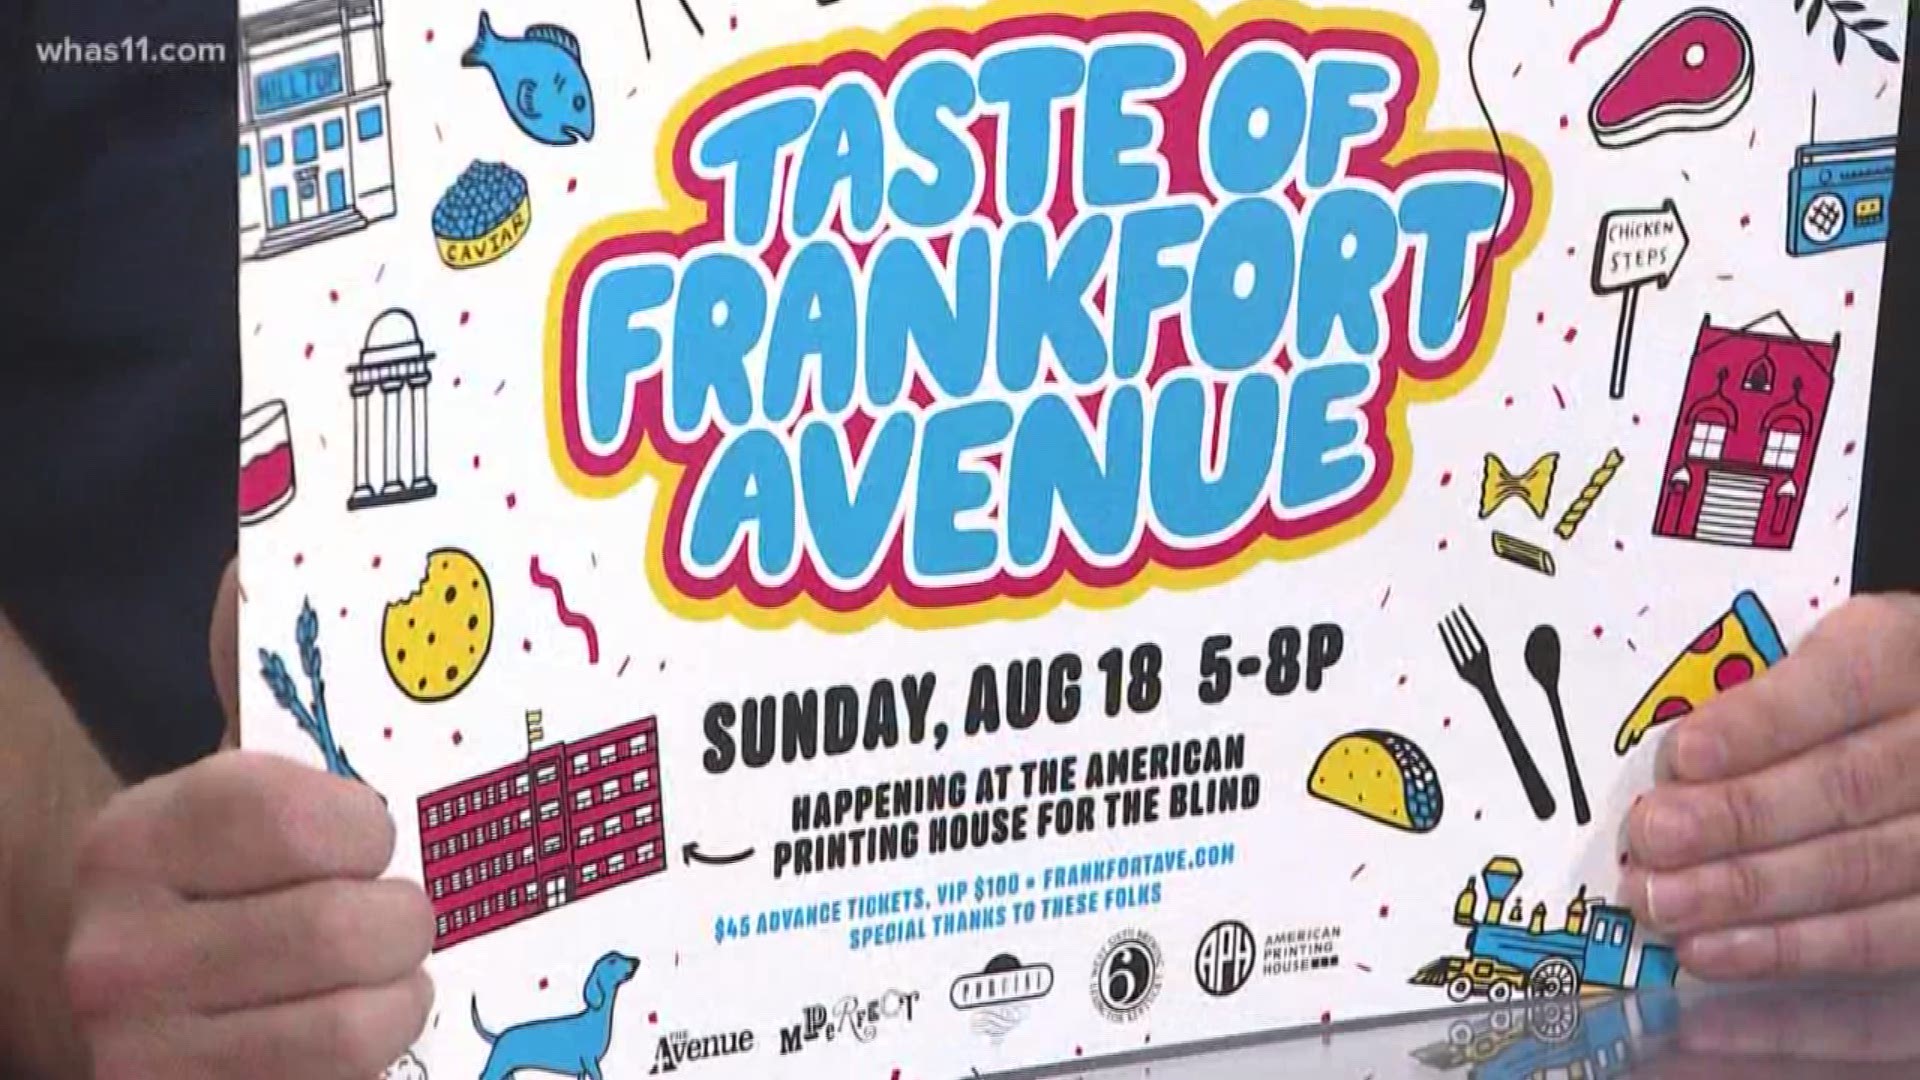 5-8 p.m. August 18 on Frankfort Ave.